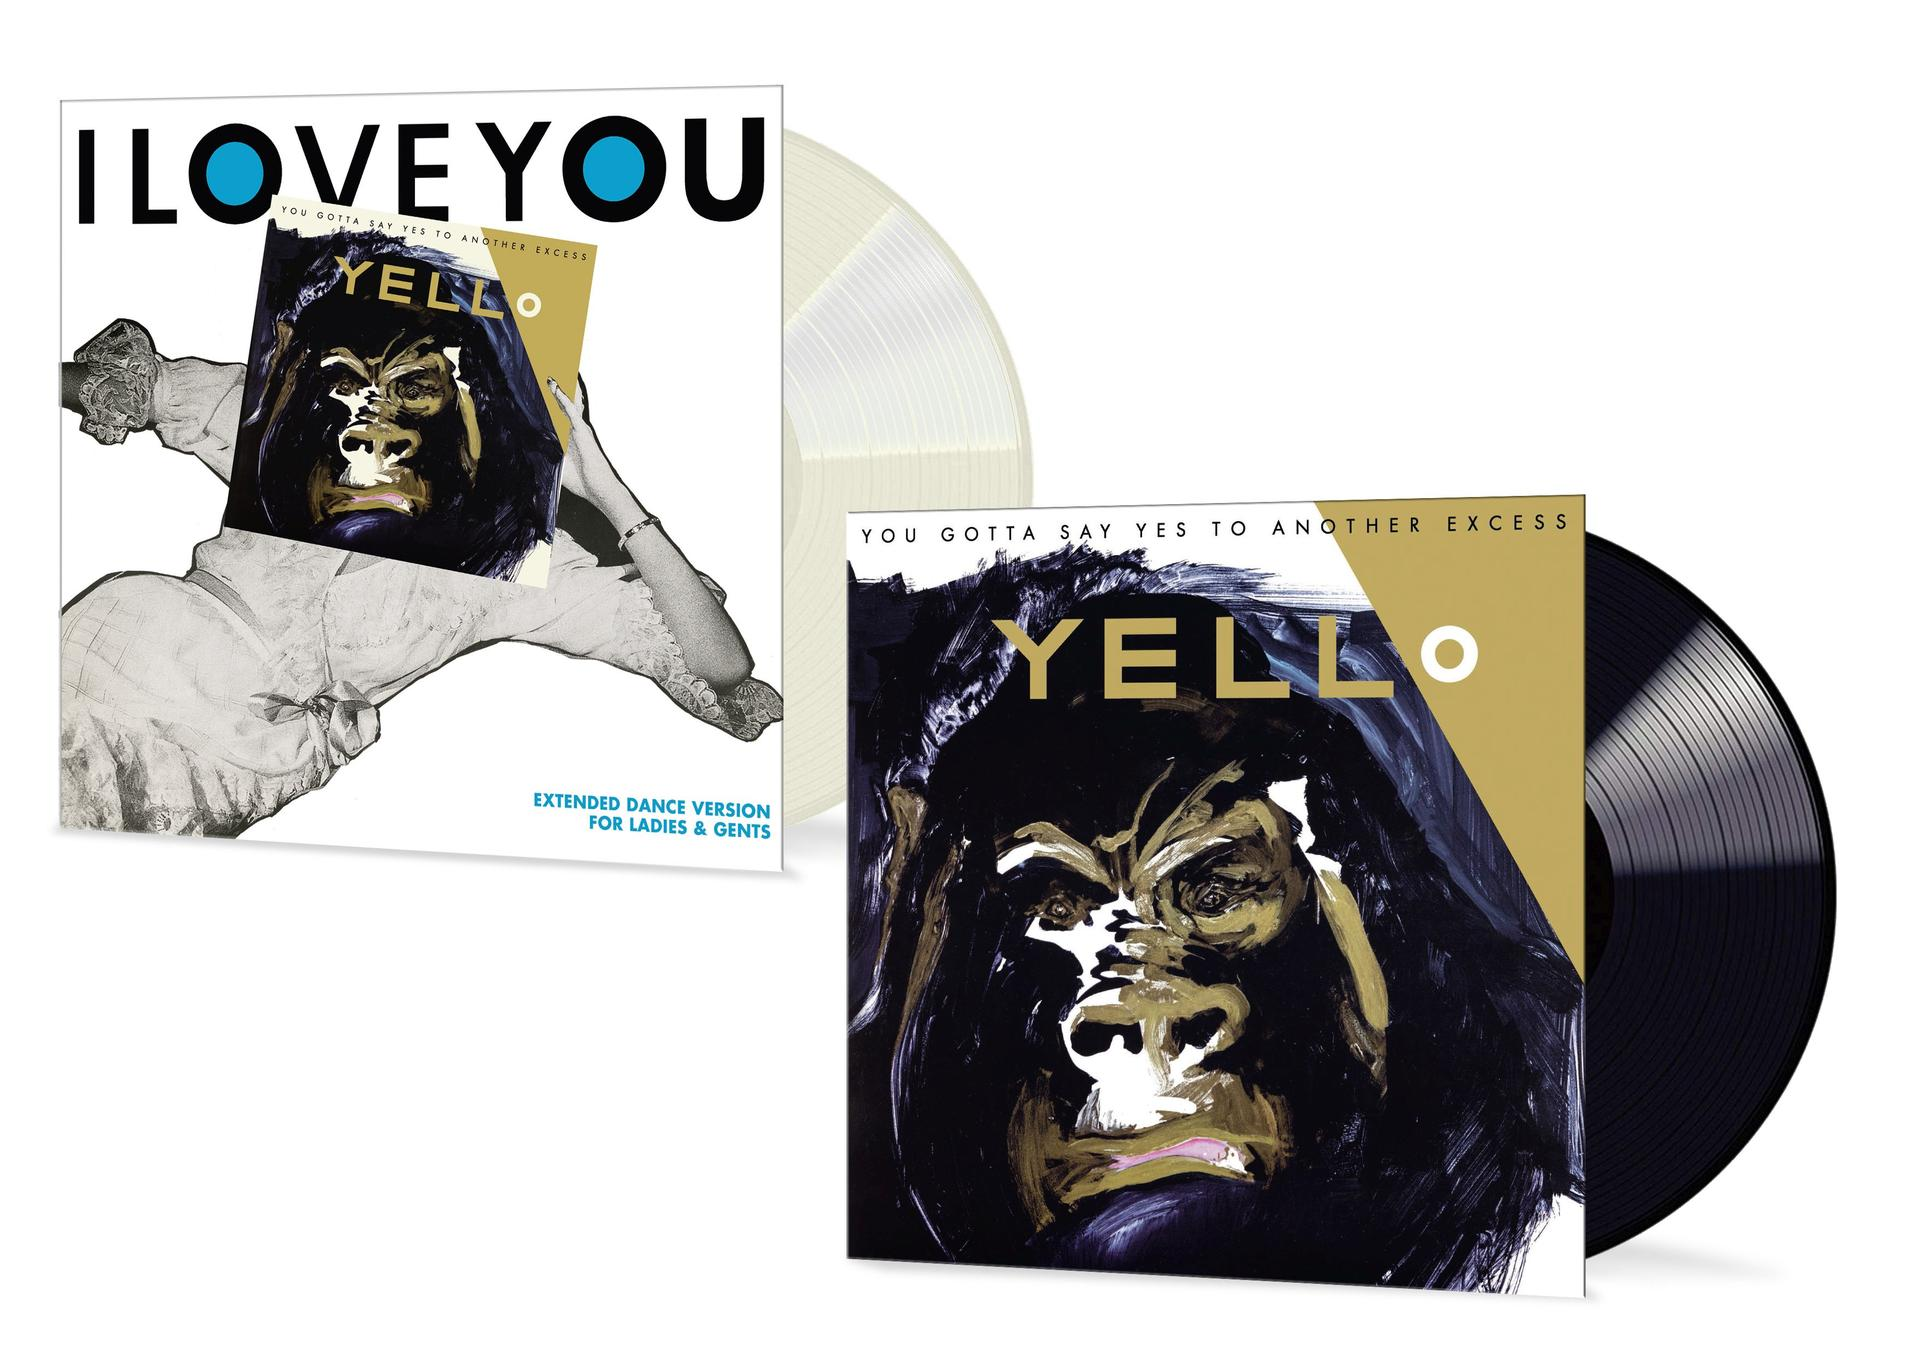 Yello - You (Vinyl) Another Gotta Say Yes - (Ltd.Re-Issue) To Excess